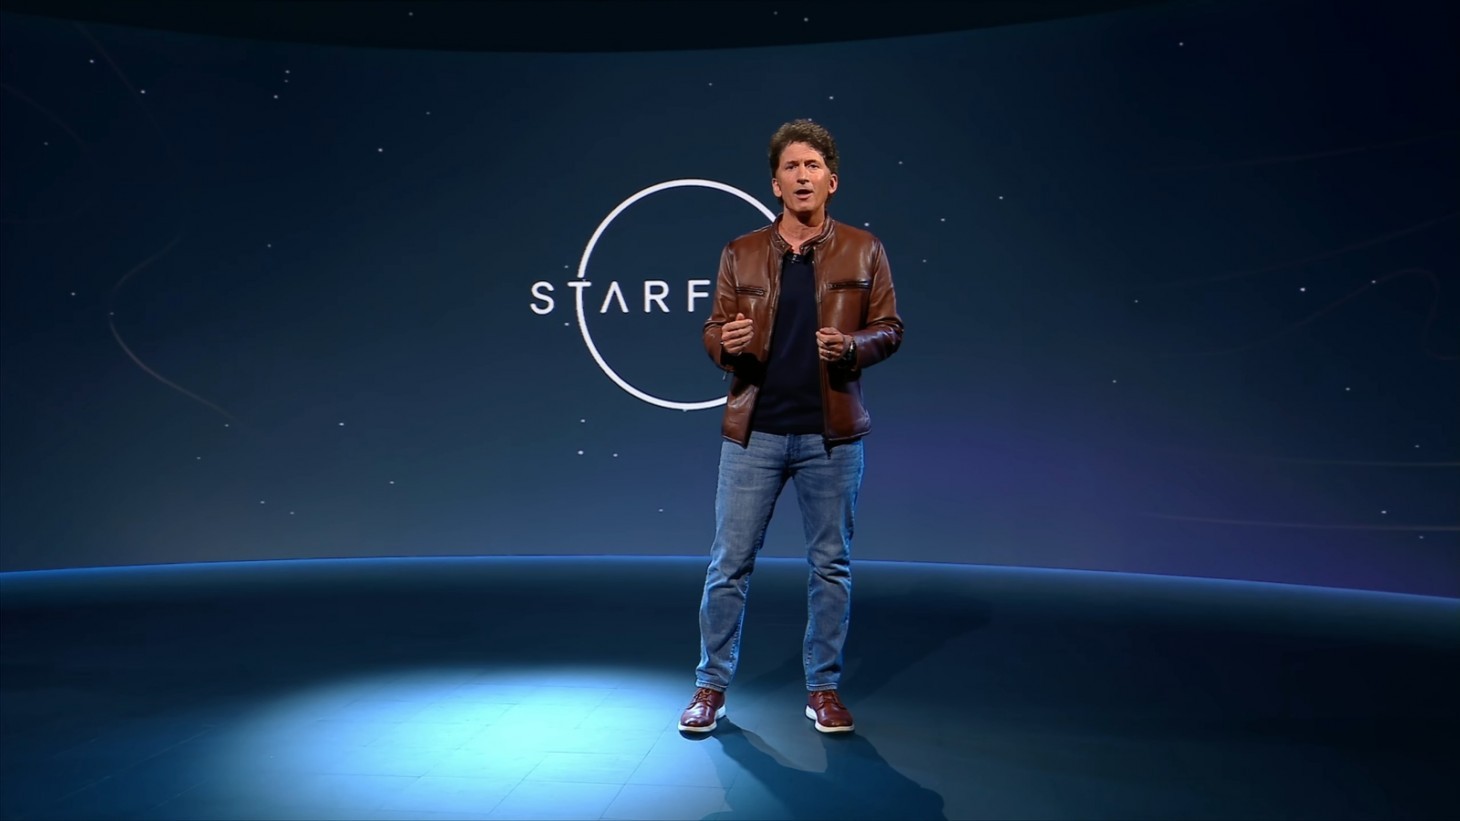 Todd Howard wanted to create Starfield back in the 1990s.